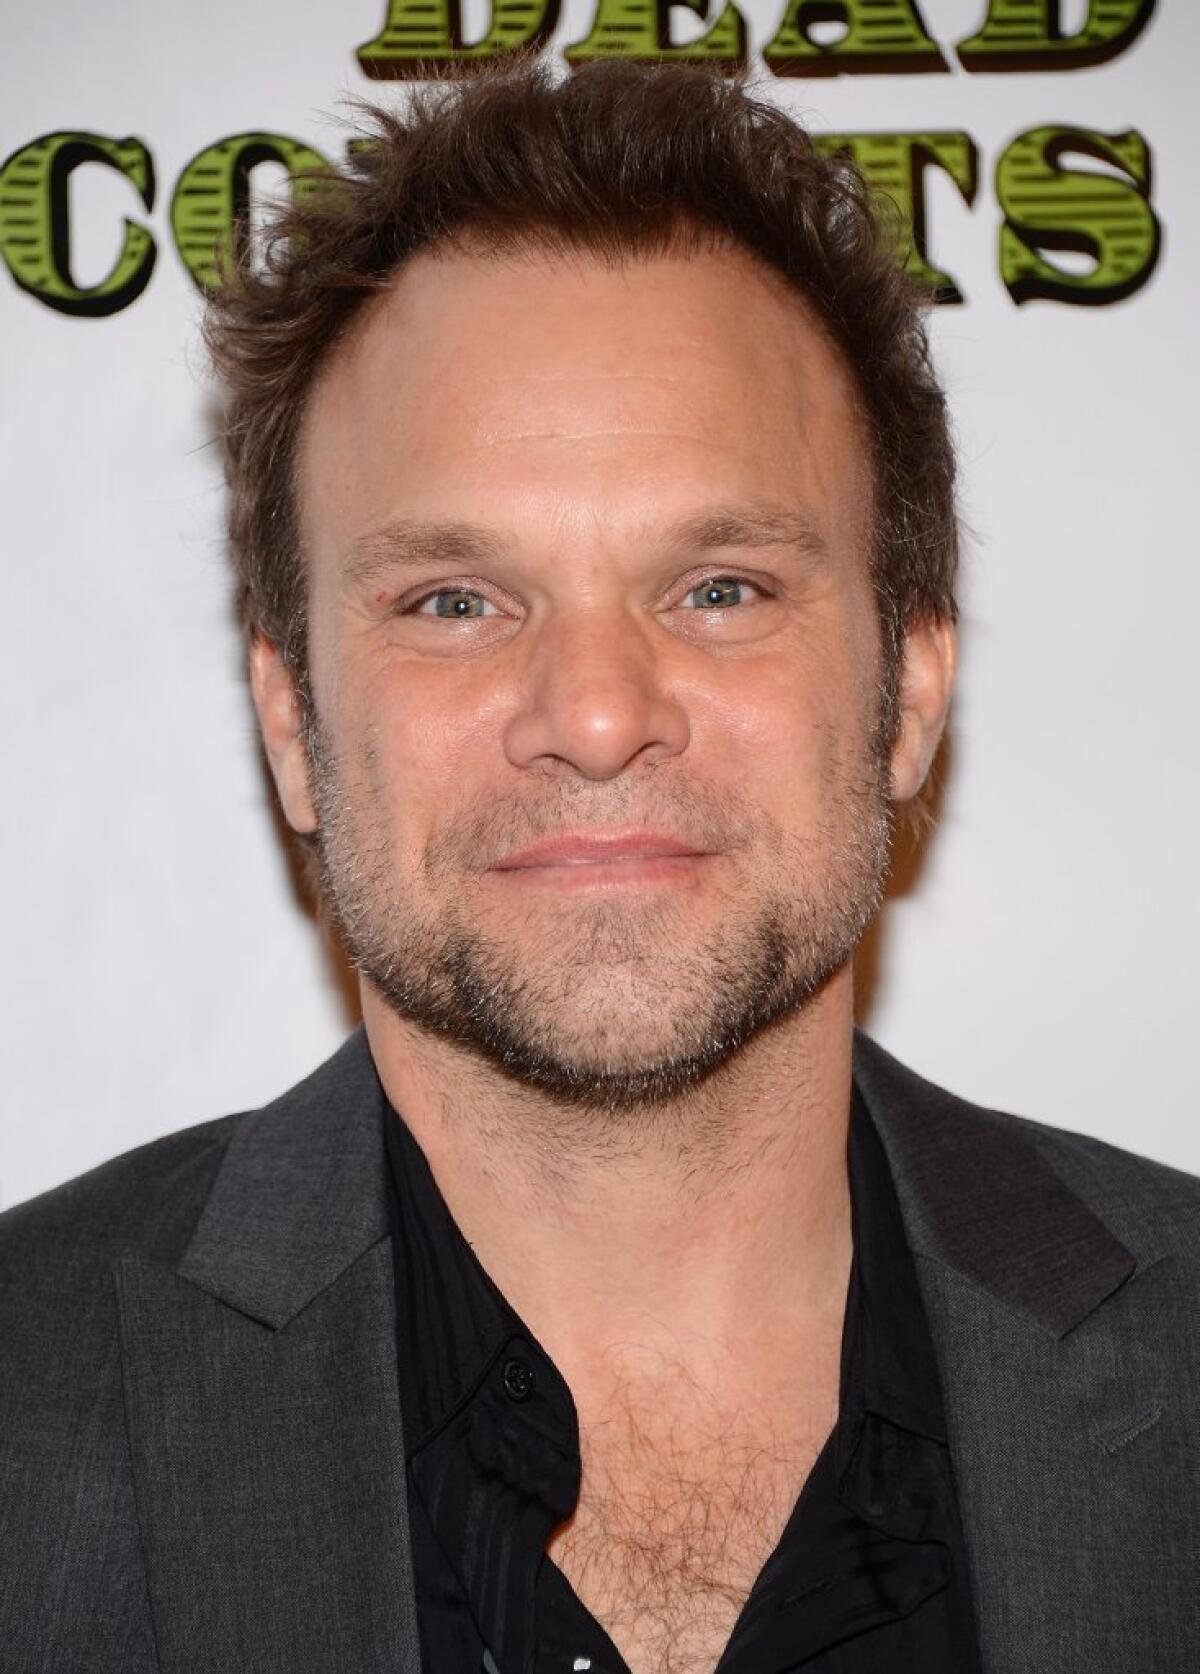 Norbert Leo Butz at the "Dead Accounts" Broadway opening night after-party at New York's Gotham Hall on Nov. 29, 2012.